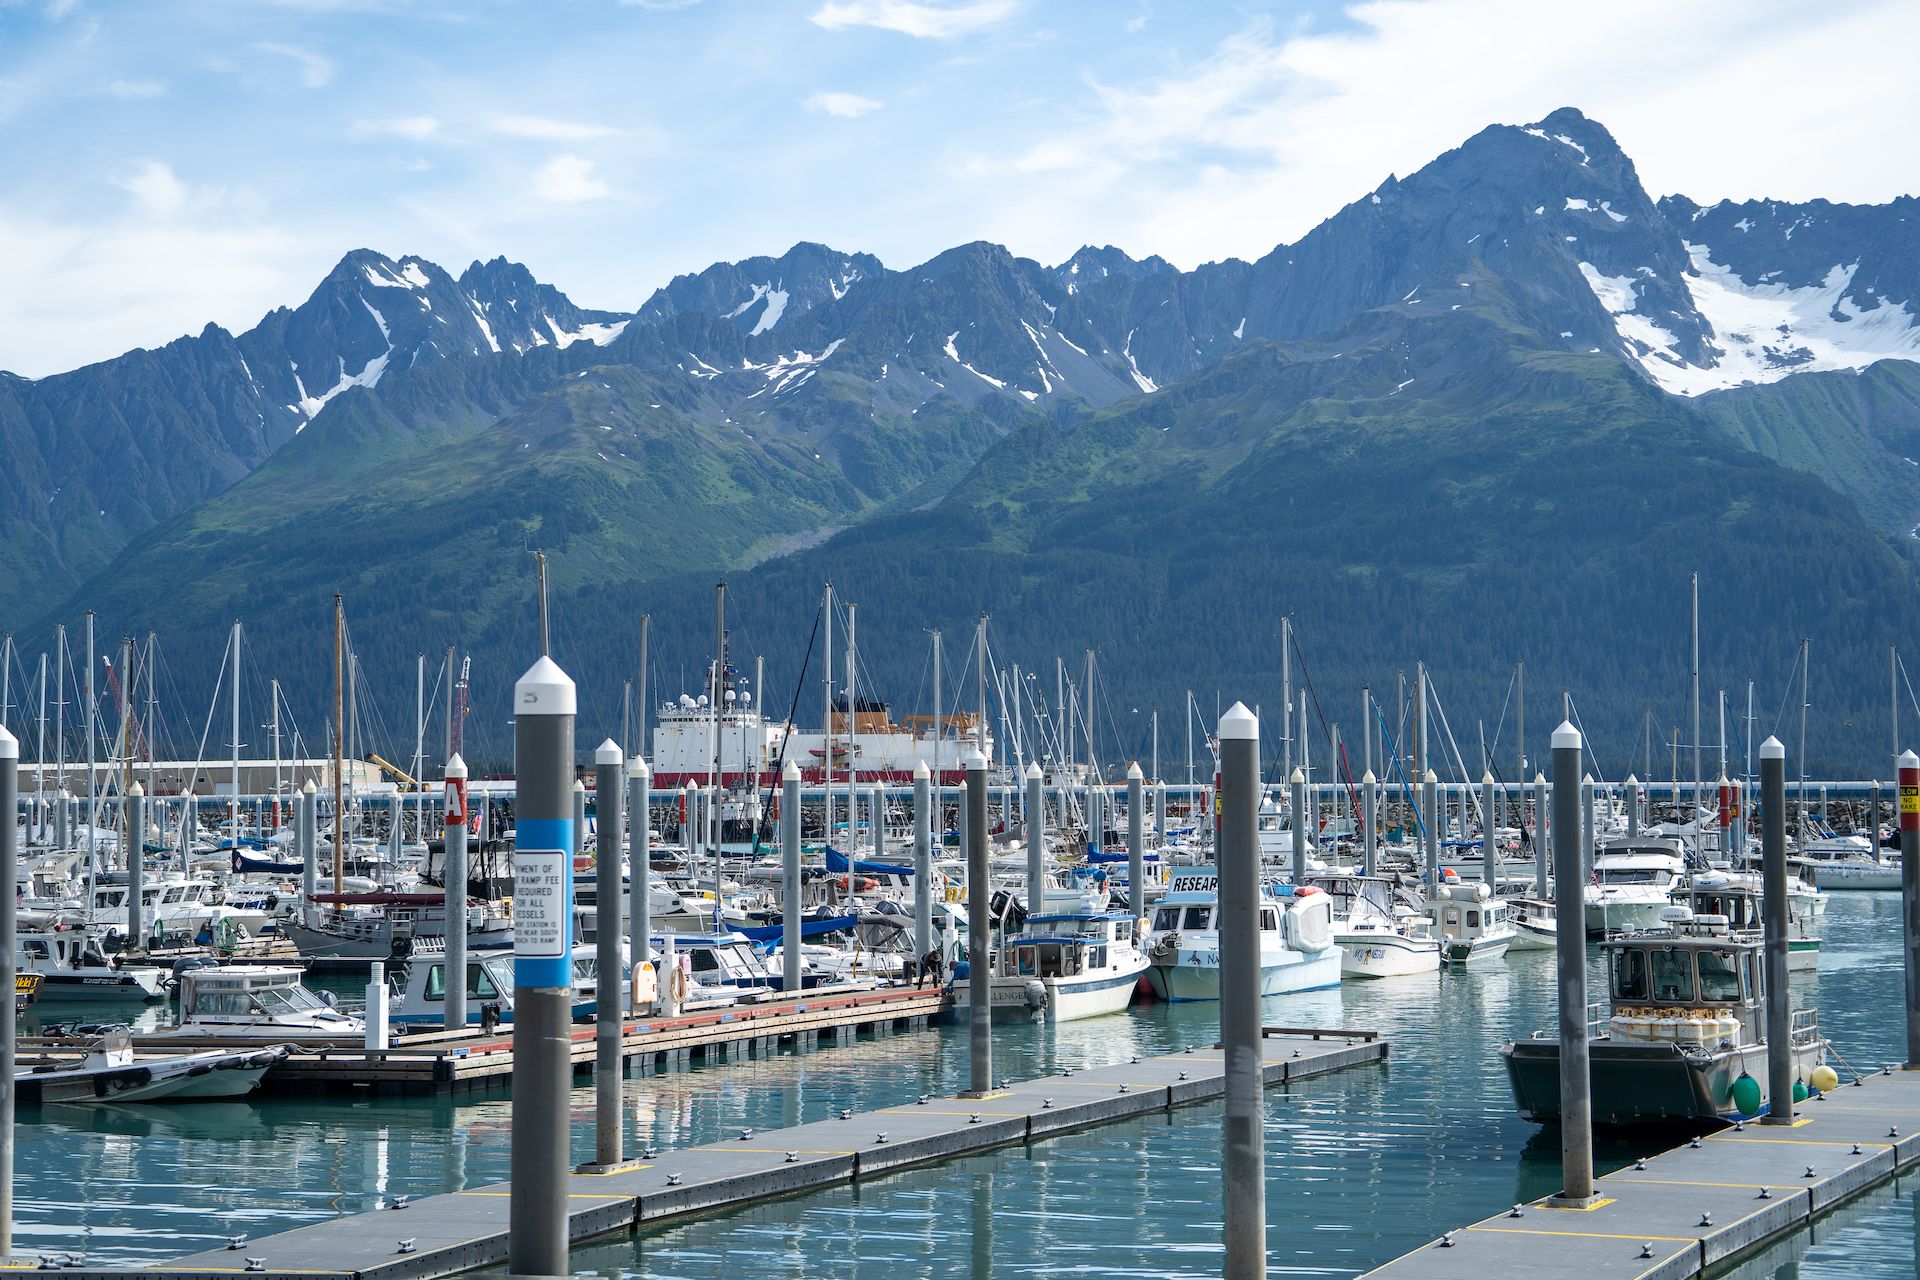 After arriving in Seward, we parked next to the port and took a stroll to get acquainted with the town.